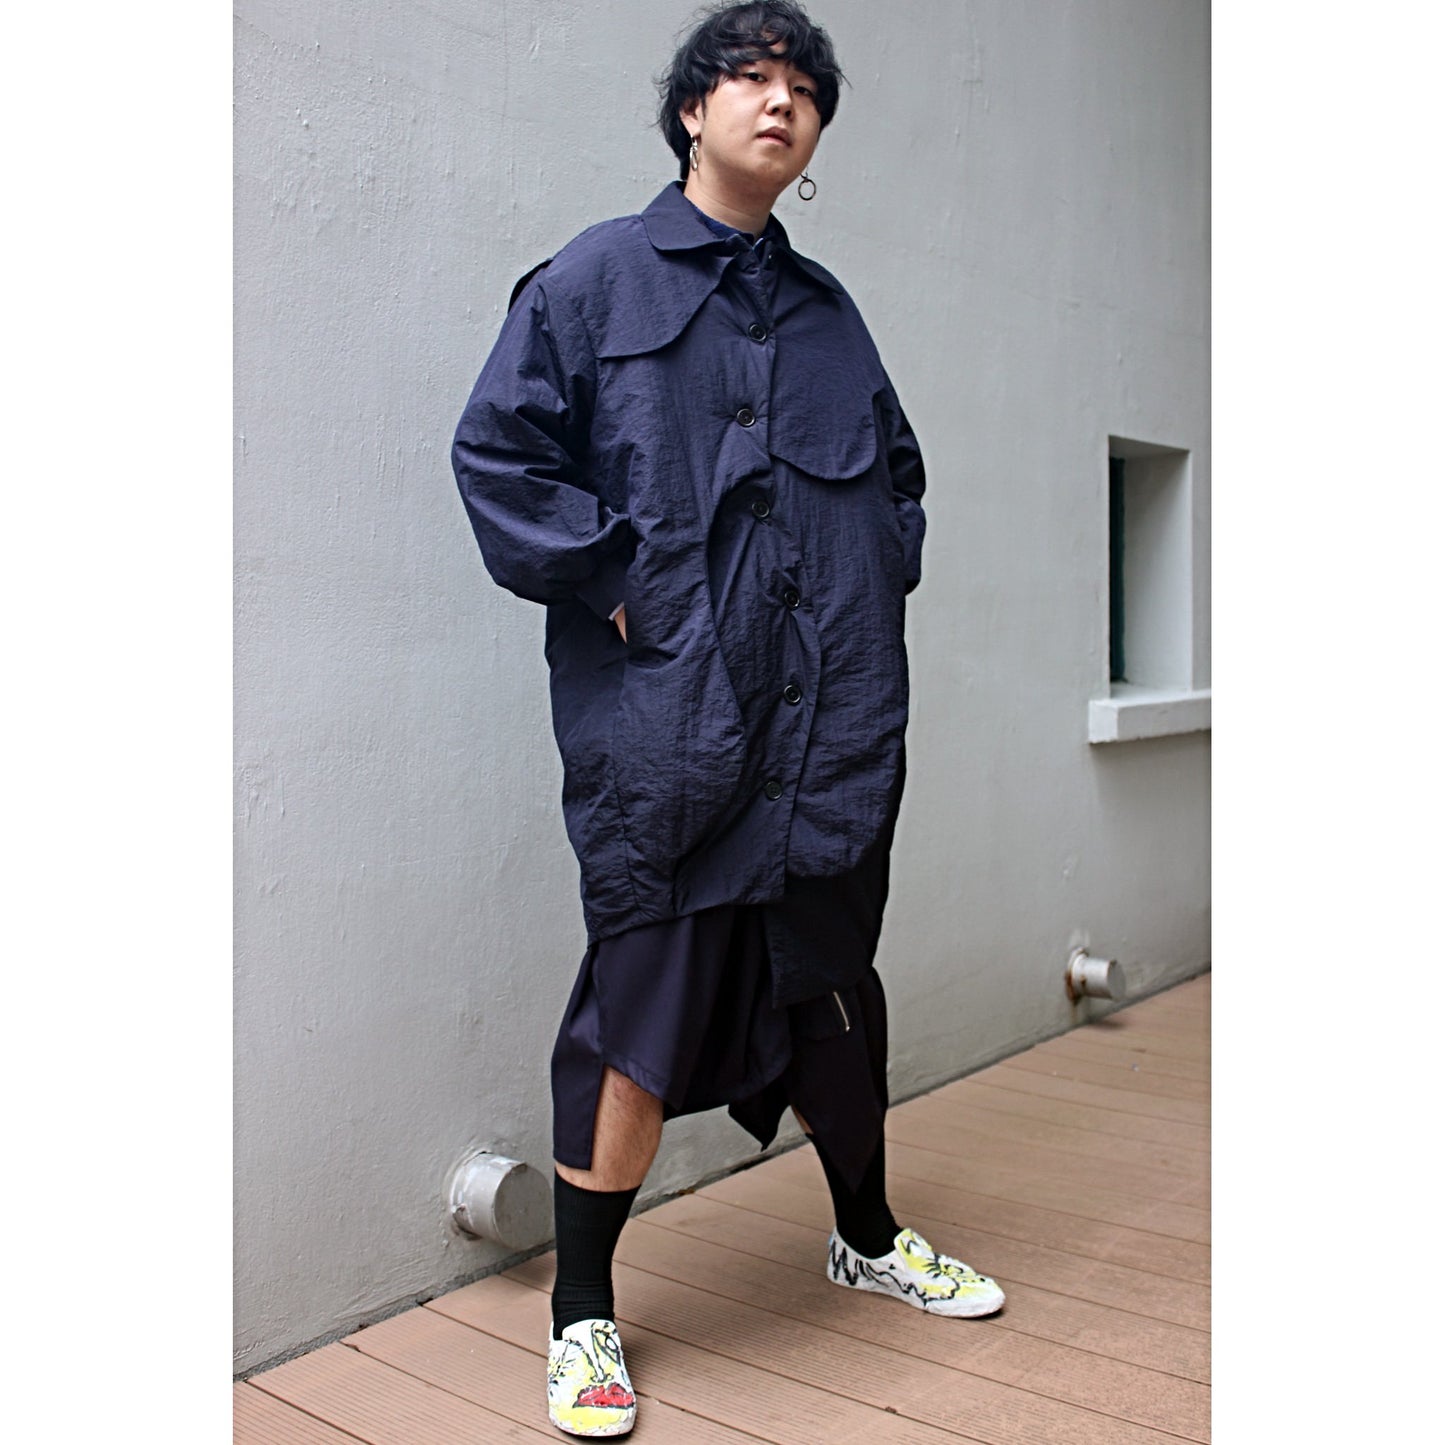 Long Coat Cocoon Elevated Panels with Padding - phenotypsetter, fashion designer label, unisex, women, accessories